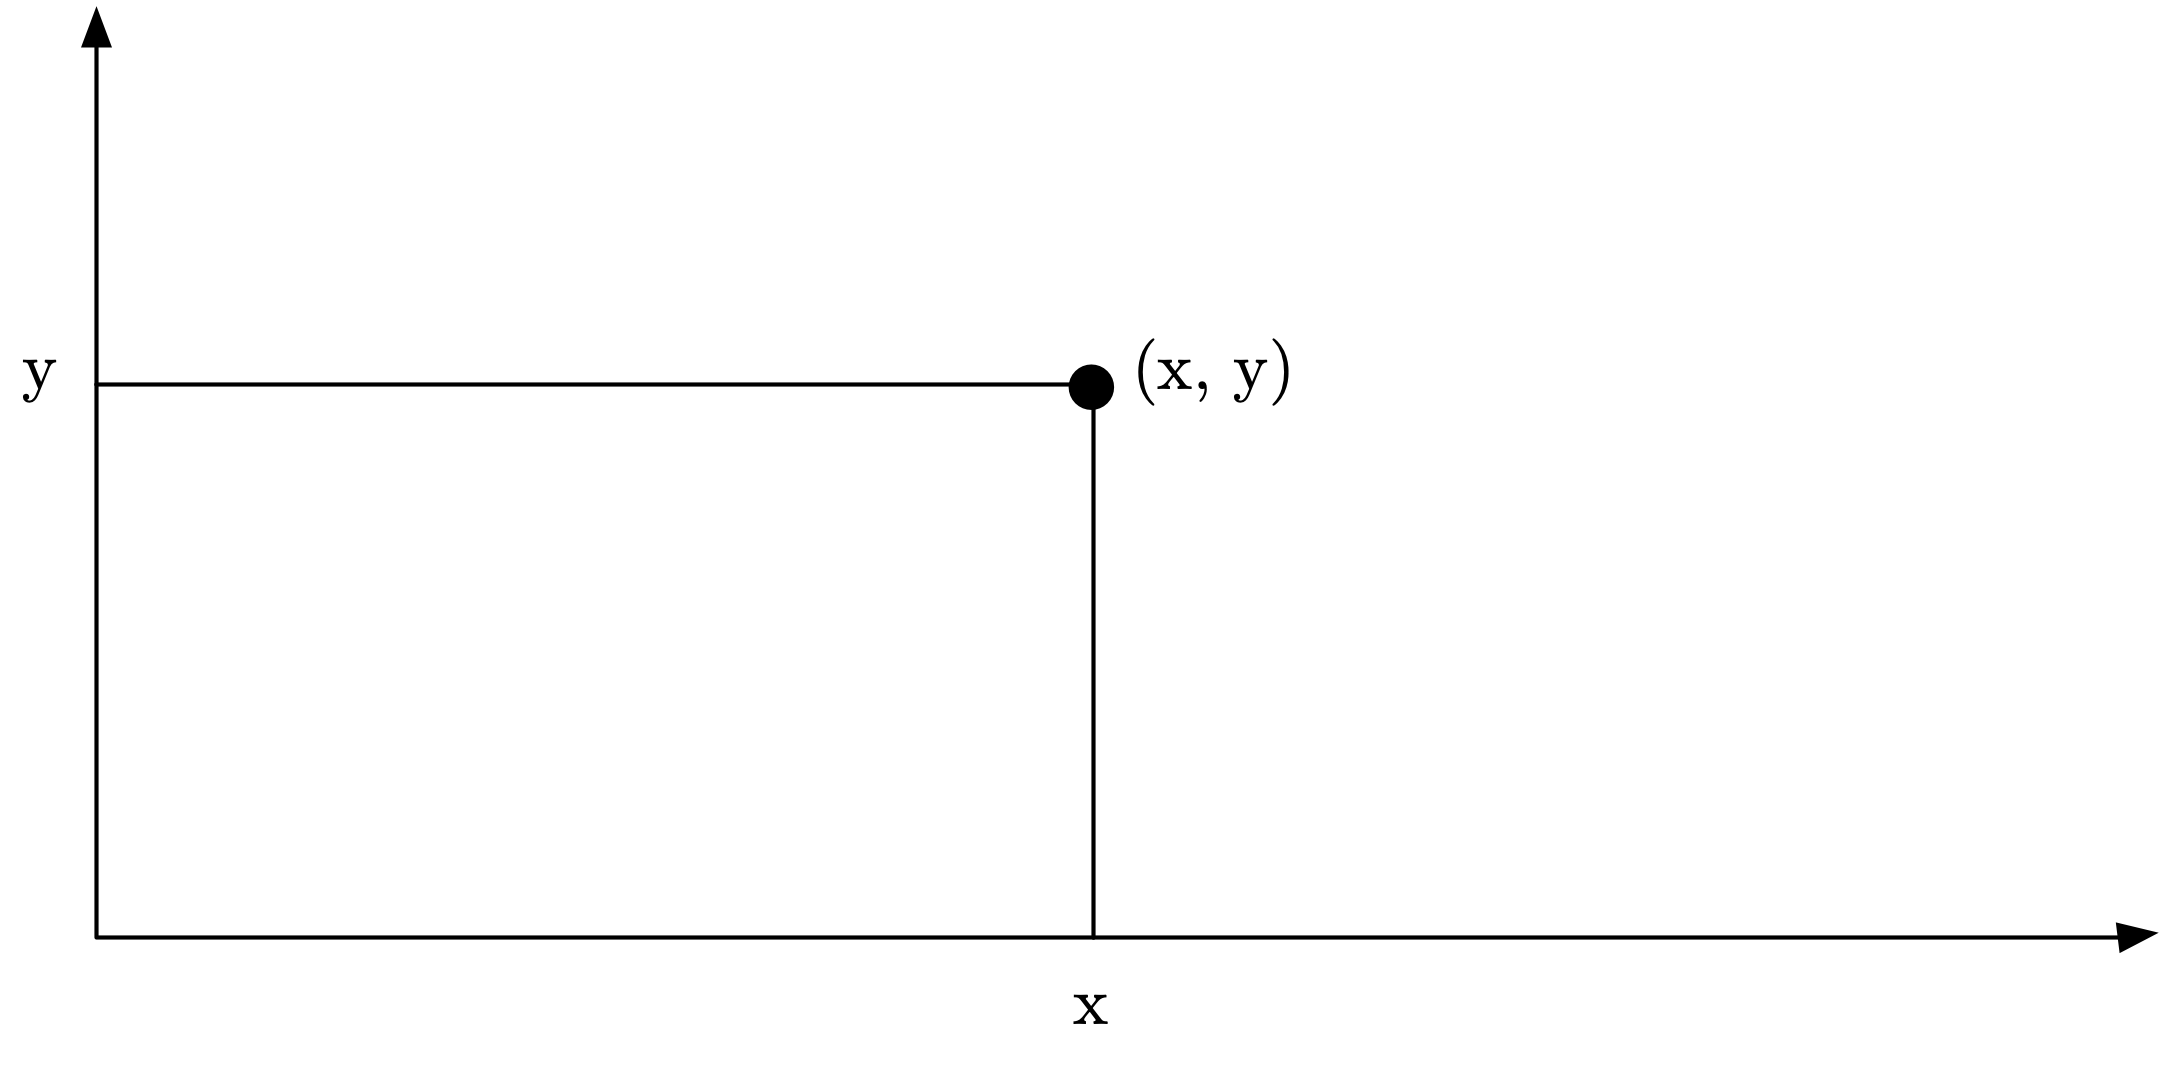 Each point on x, y plane is in the Cartesian product of 2 sets of real numbers.